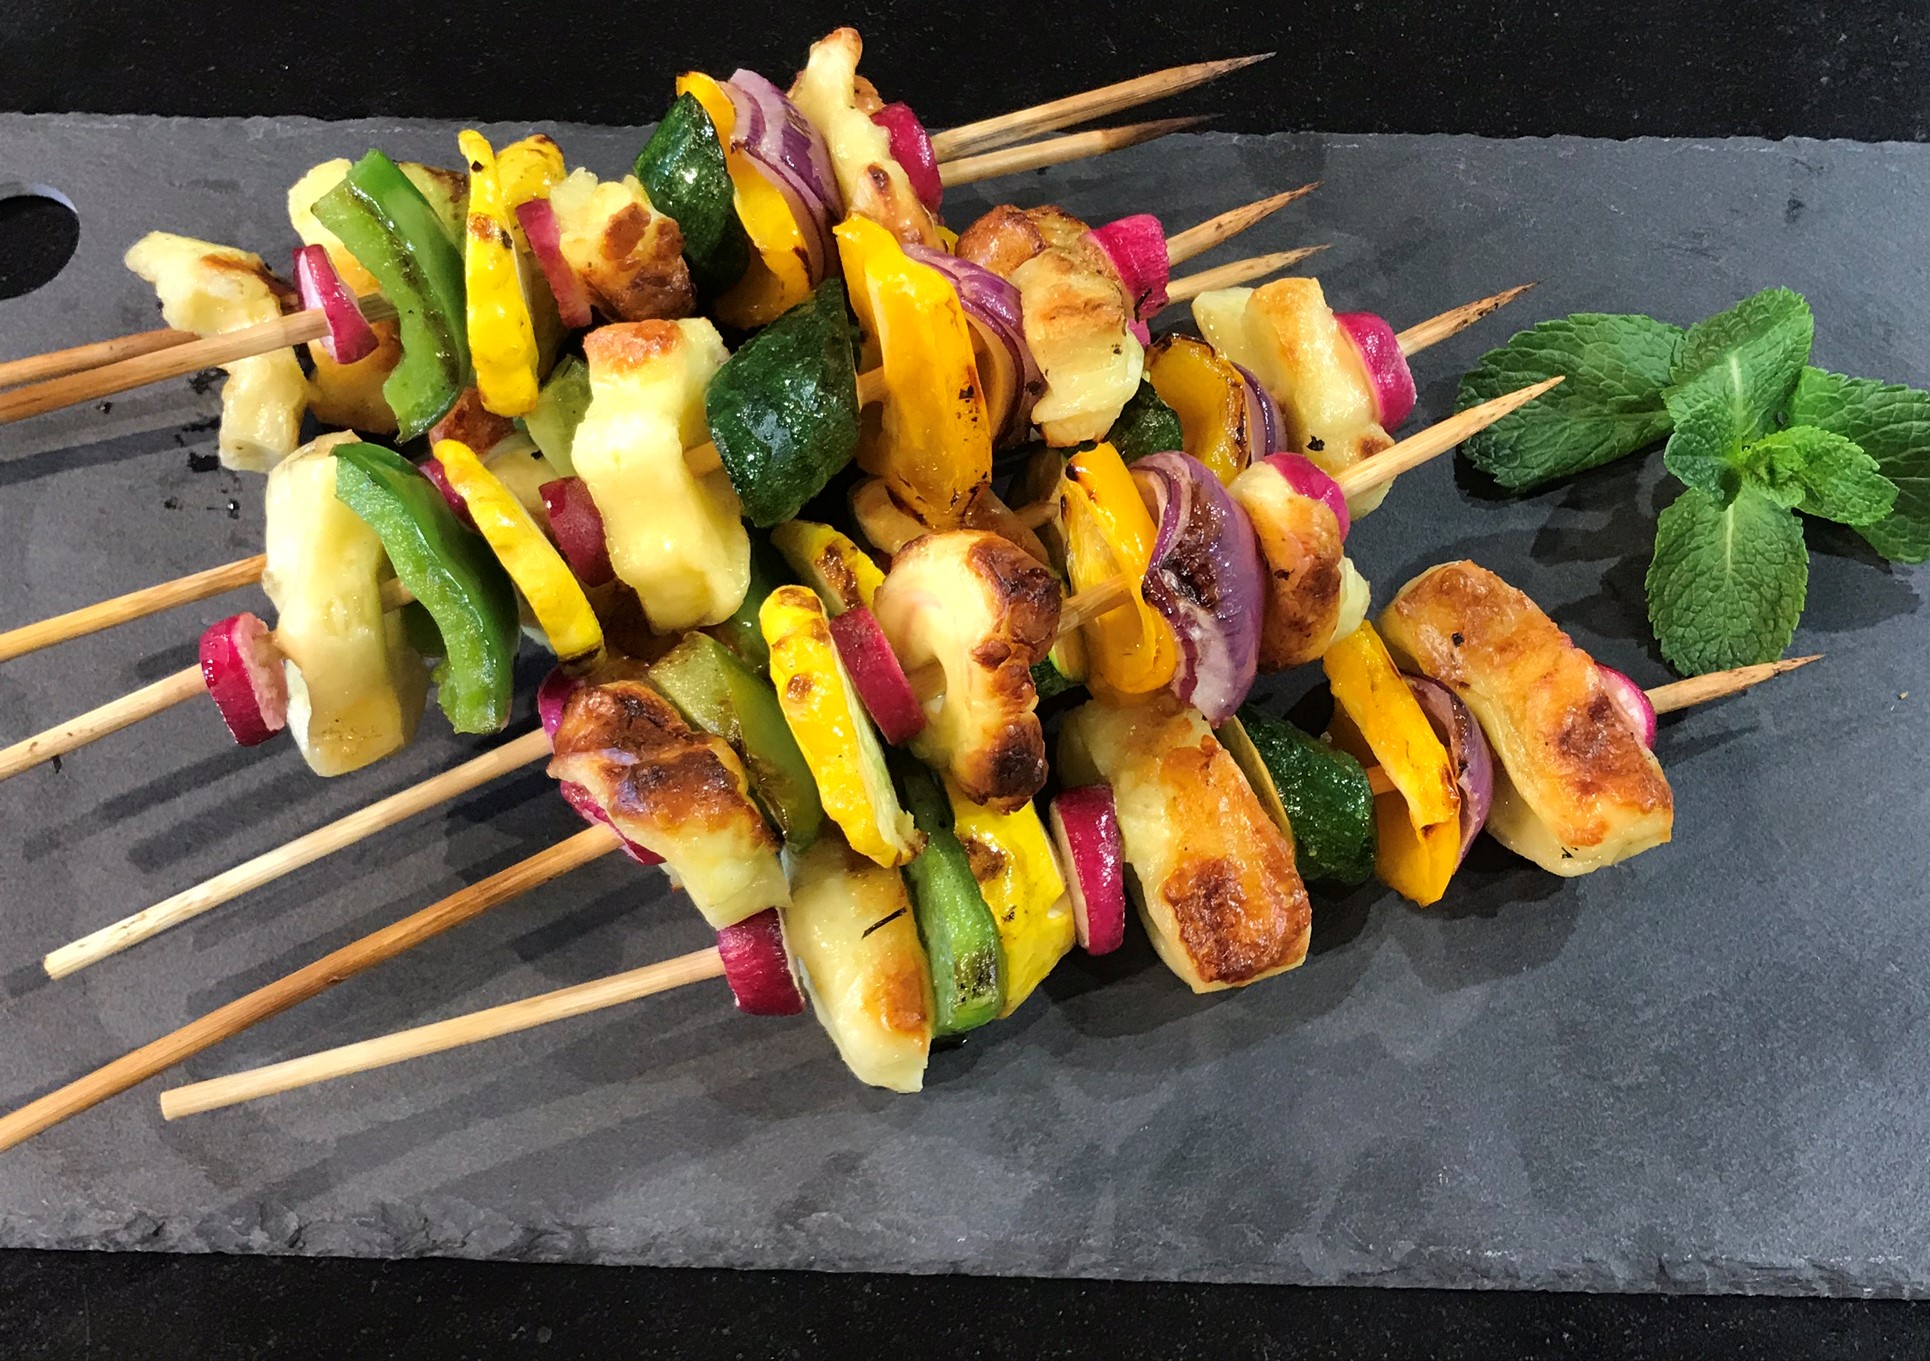 Braaied Halloumi Skewers with a Mint Dressing